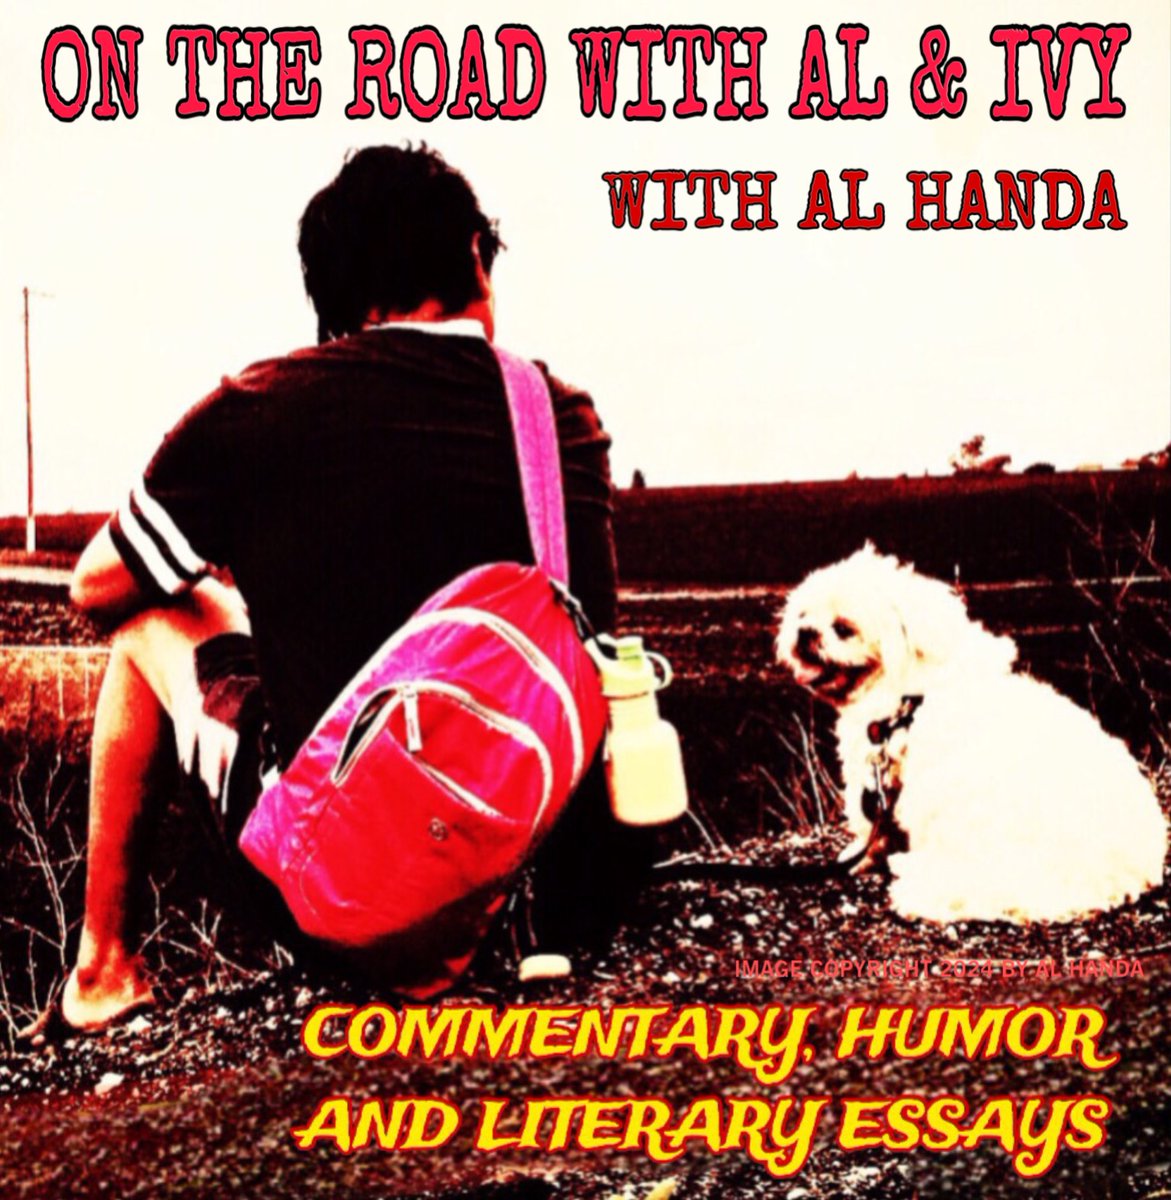 'On The Road With Al & Ivy' will become a Podcast on Spotify in April. The first series will be an audio version of 'Volume 2, Literary Essays, Commentary and Humor.' This series will be free. That's obviously a big change in my publishing schedule. I had planned to go to audio…